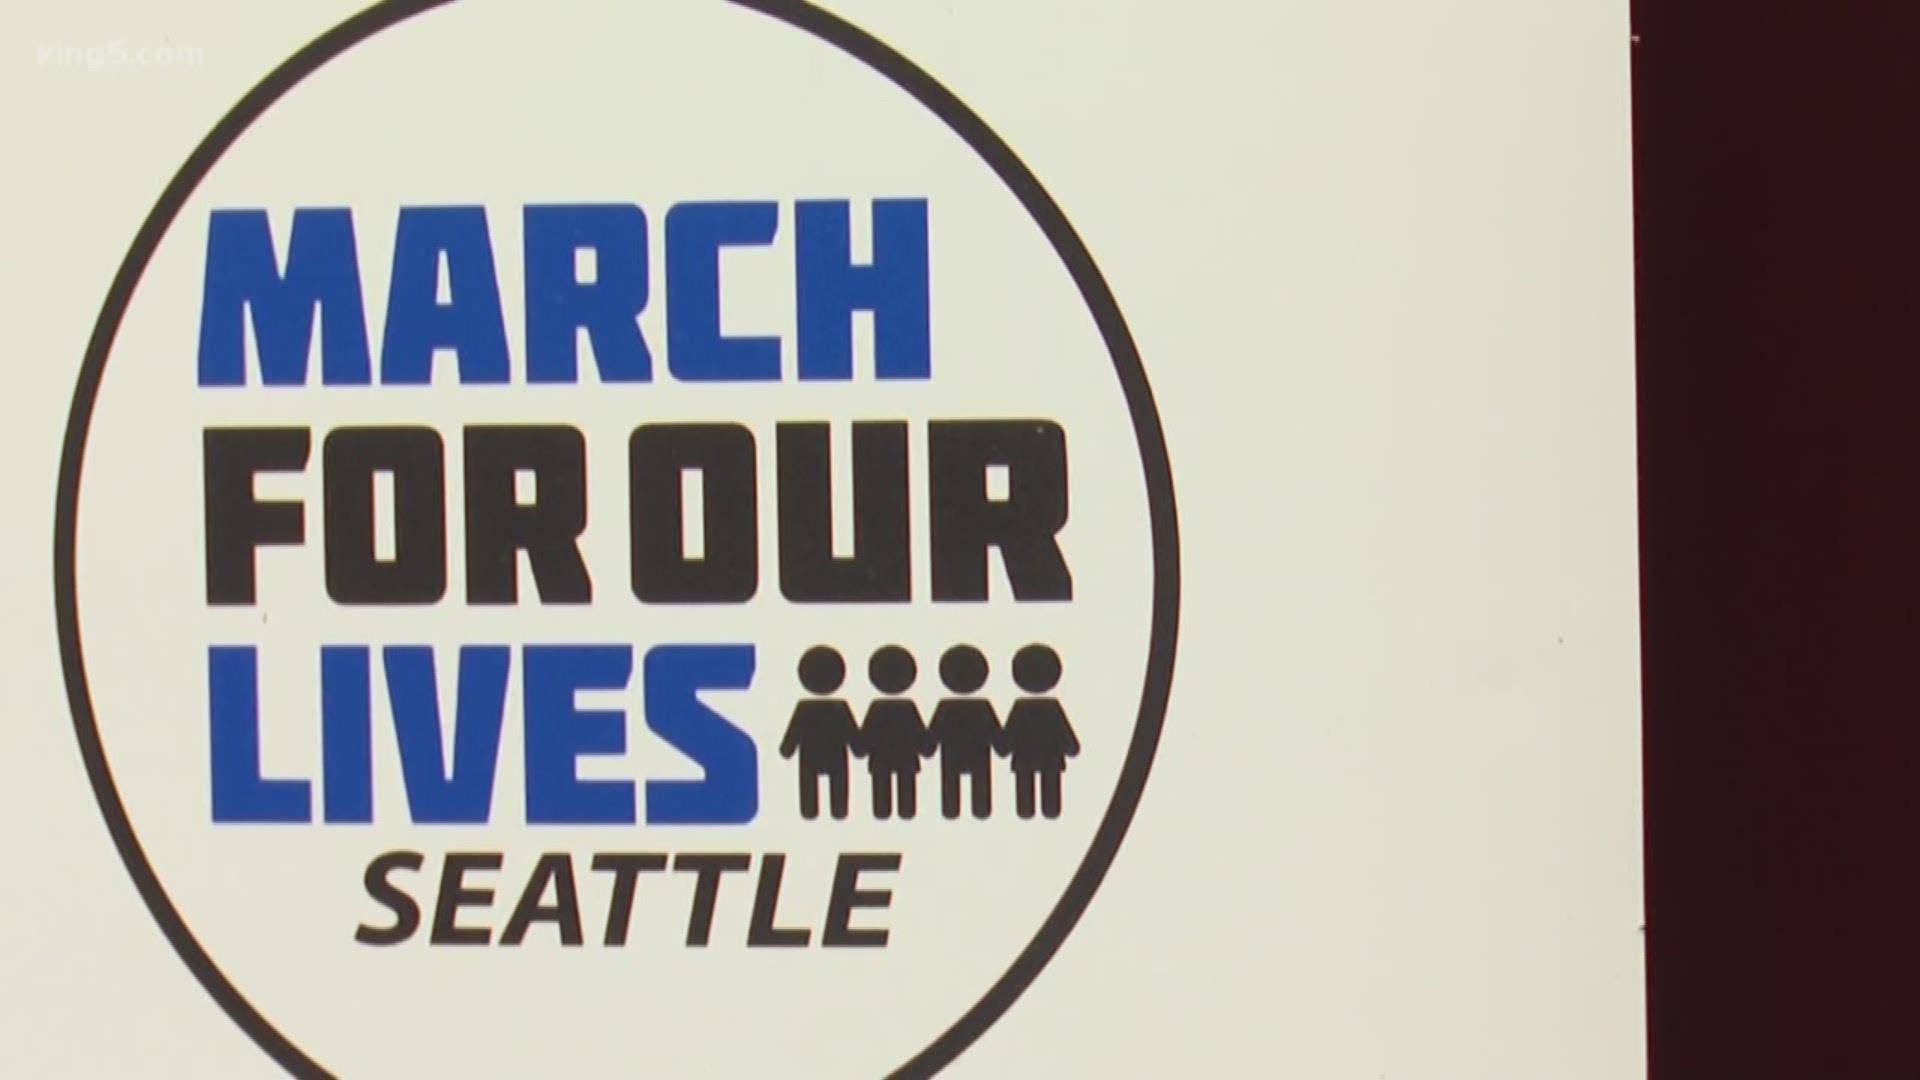 The Columbine victims were remembered in Seattle today. The event wasn't just about commemorating the victims, It was also a rally for change.